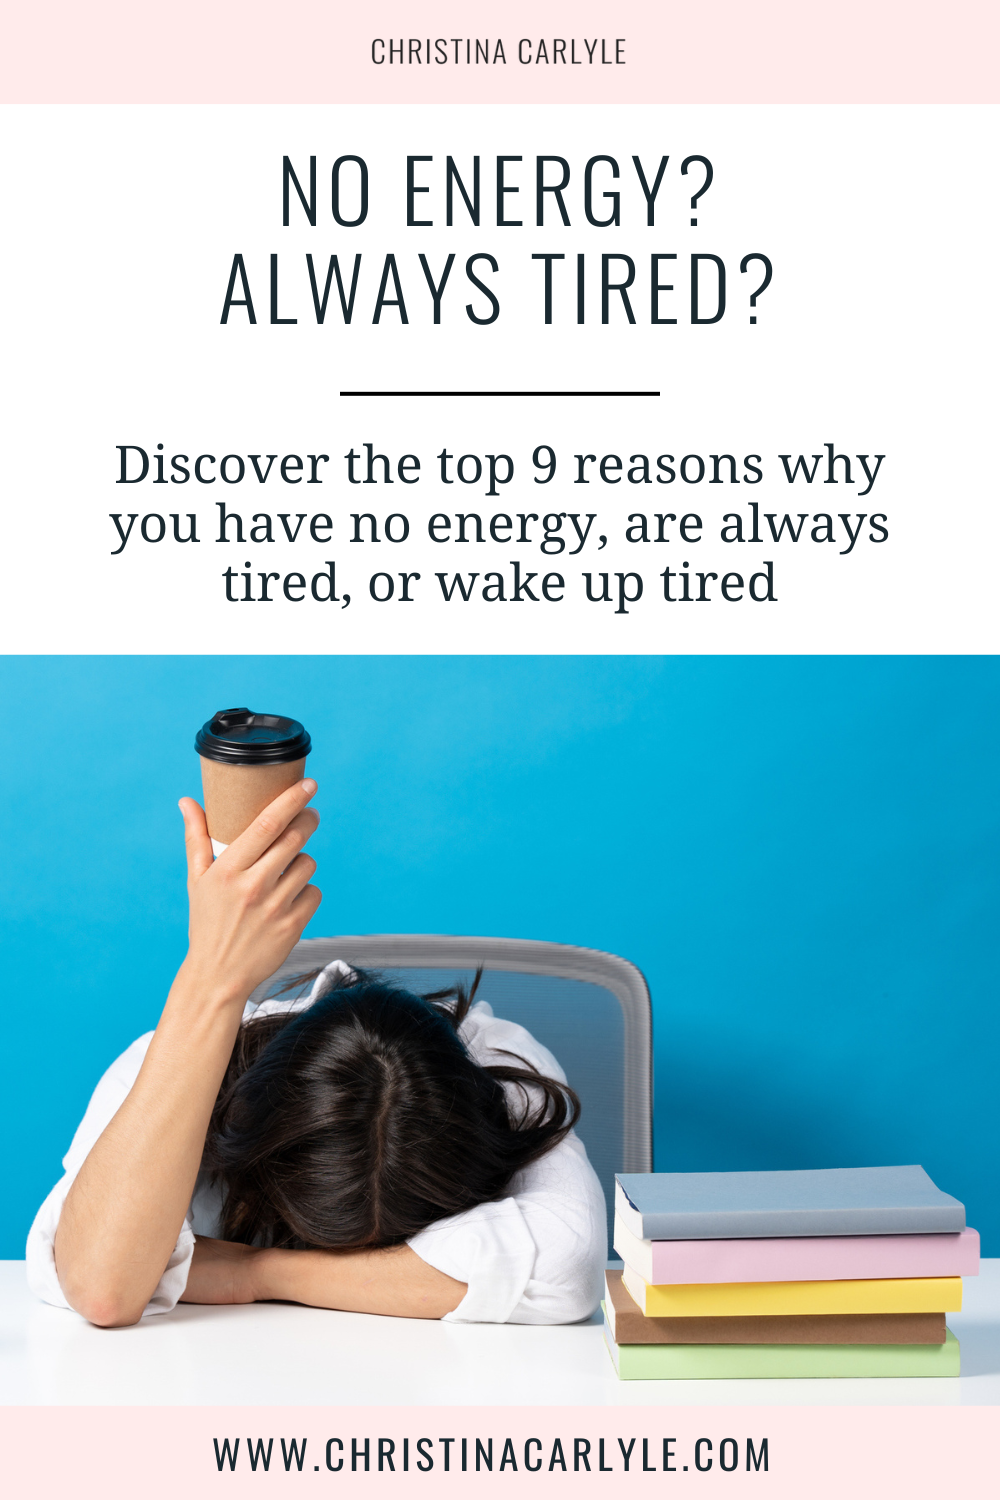 text that says No Energy? Always Tired? Discover the top 9 reasons for fatigue and energy issues and a picture of a tired woman